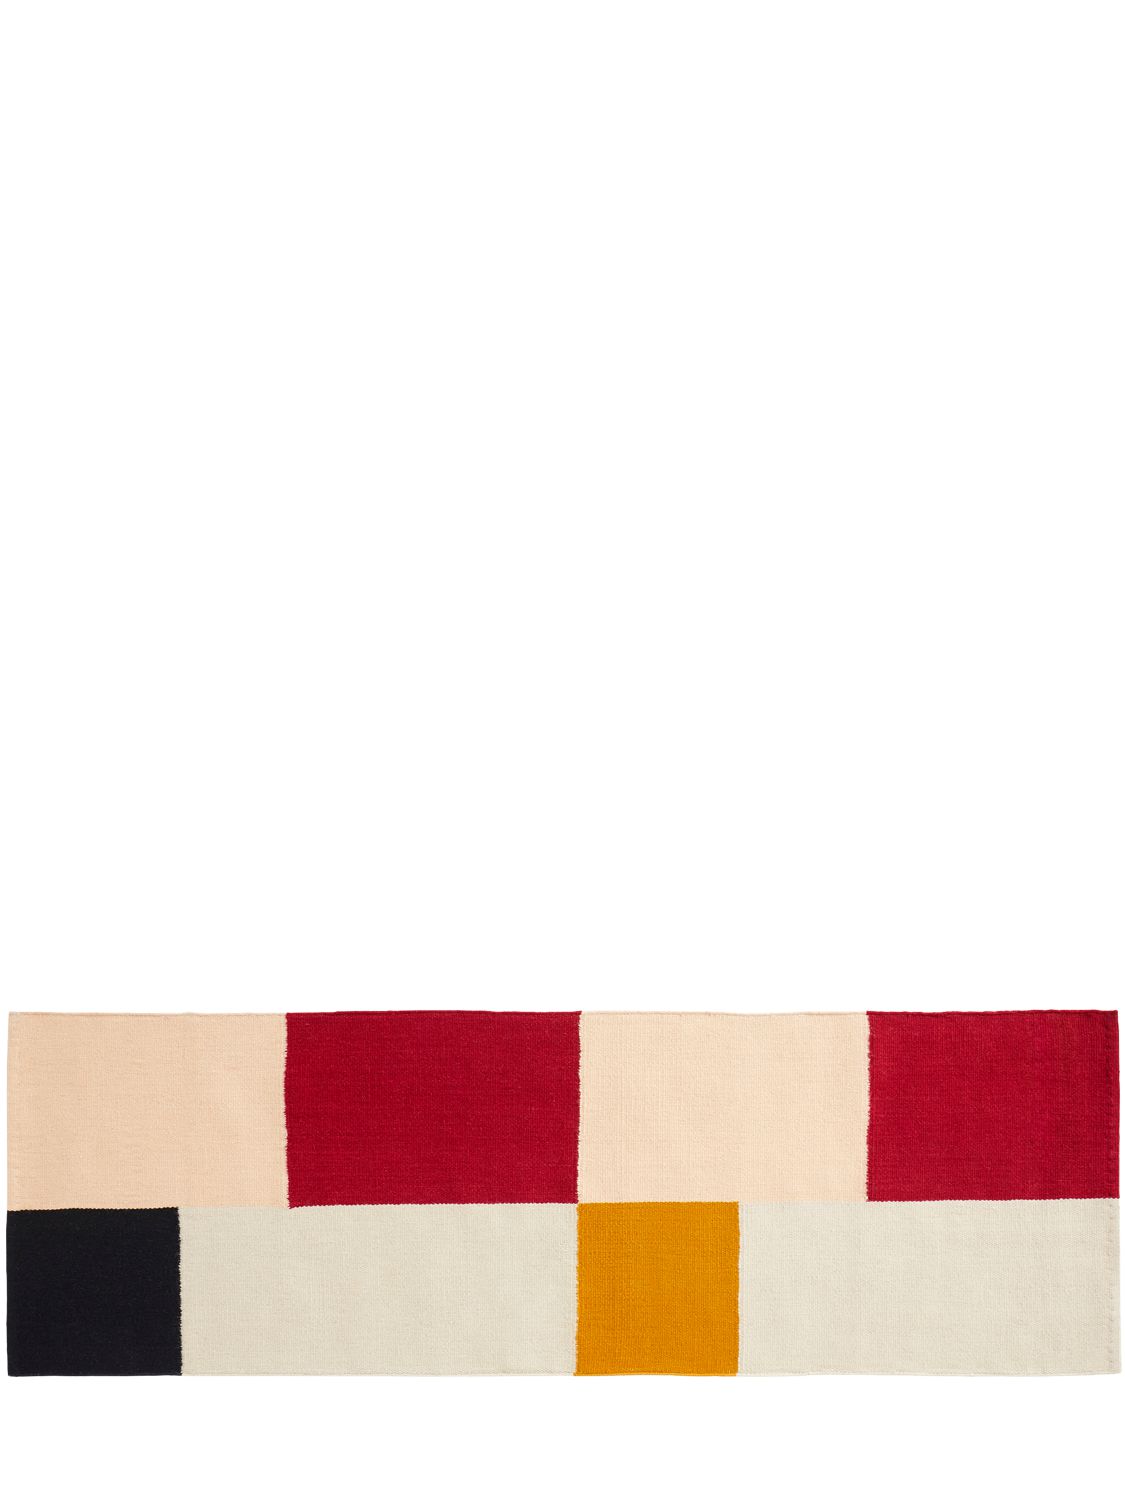 Image of Ethan Cook Flat Works Double Stack Rug